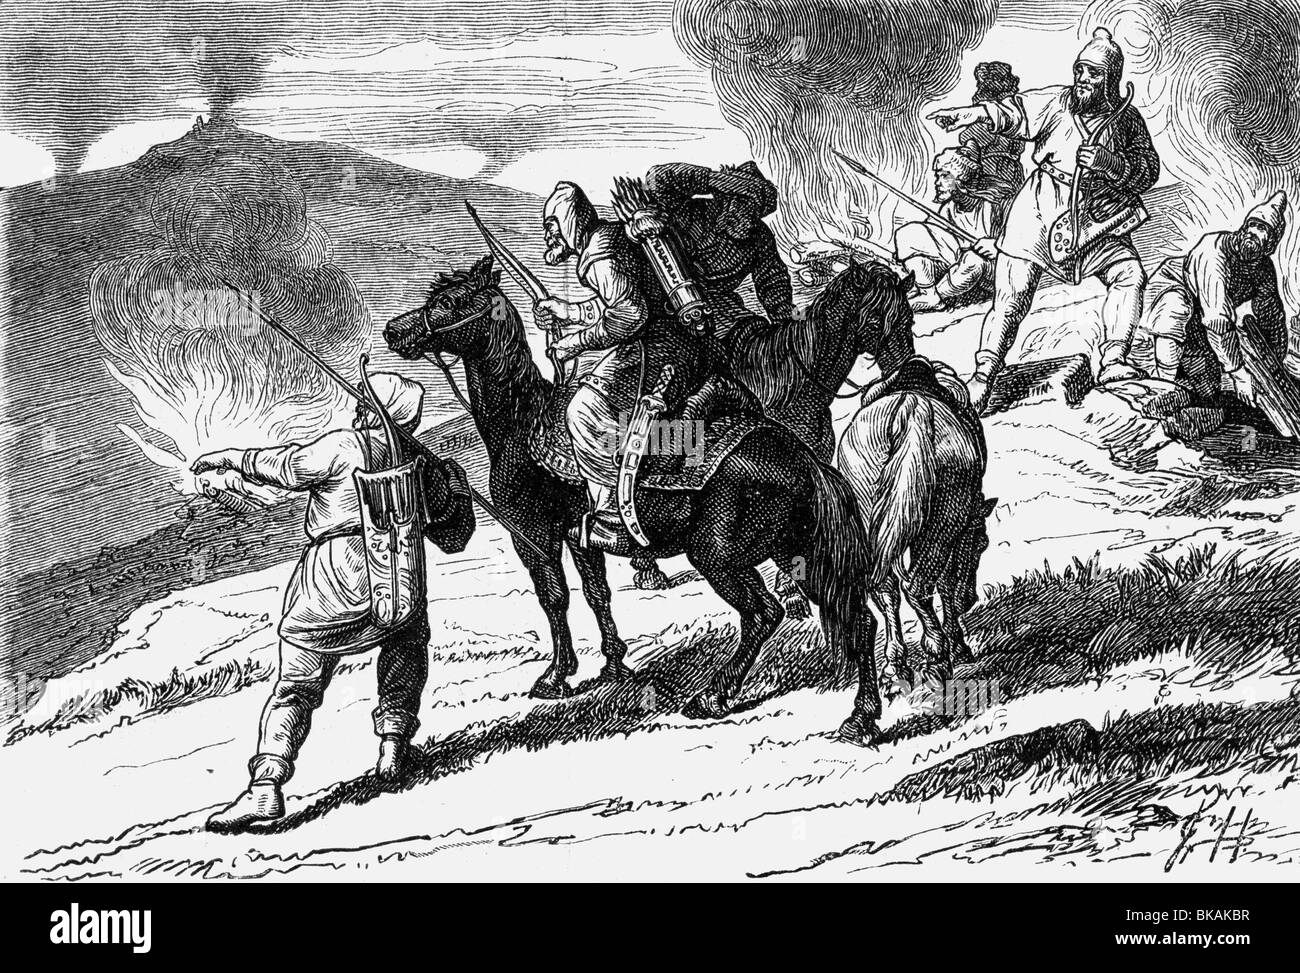 Middle Ages, Magyar Invasions 899 - 955, Magyar Invasions 899 - 955, Hungarian warriors, wood engraving, 19th century, historic, historical, Magyars, invasion, war, wars, military, riders, East Francia, 10th century, Germany, bow and arrow, horses, fire, medieval, people, Stock Photo